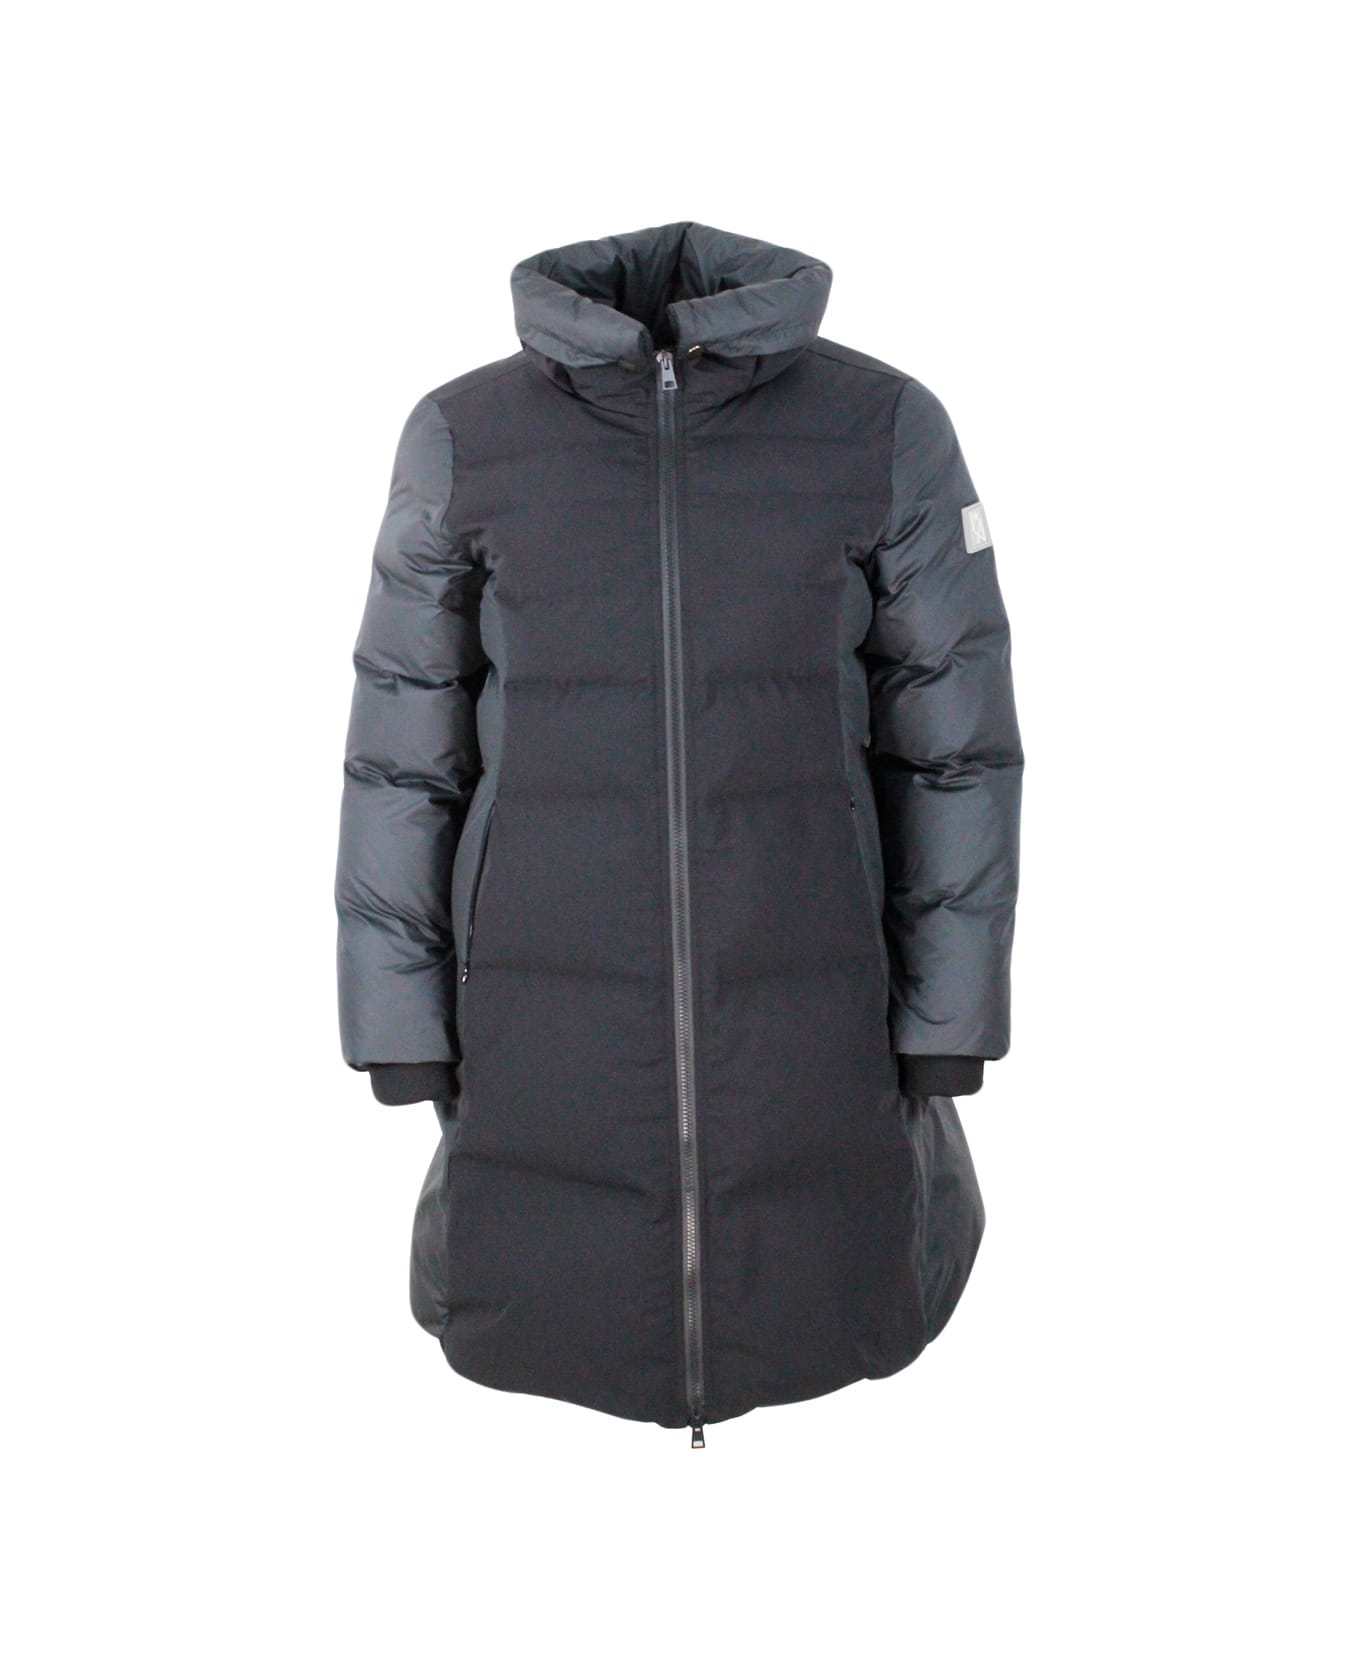 Lorena Antoniazzi Chalet Collection Down Jacket In Two-tone Technical Fabric With Openable Collar And Zip Closure - Black